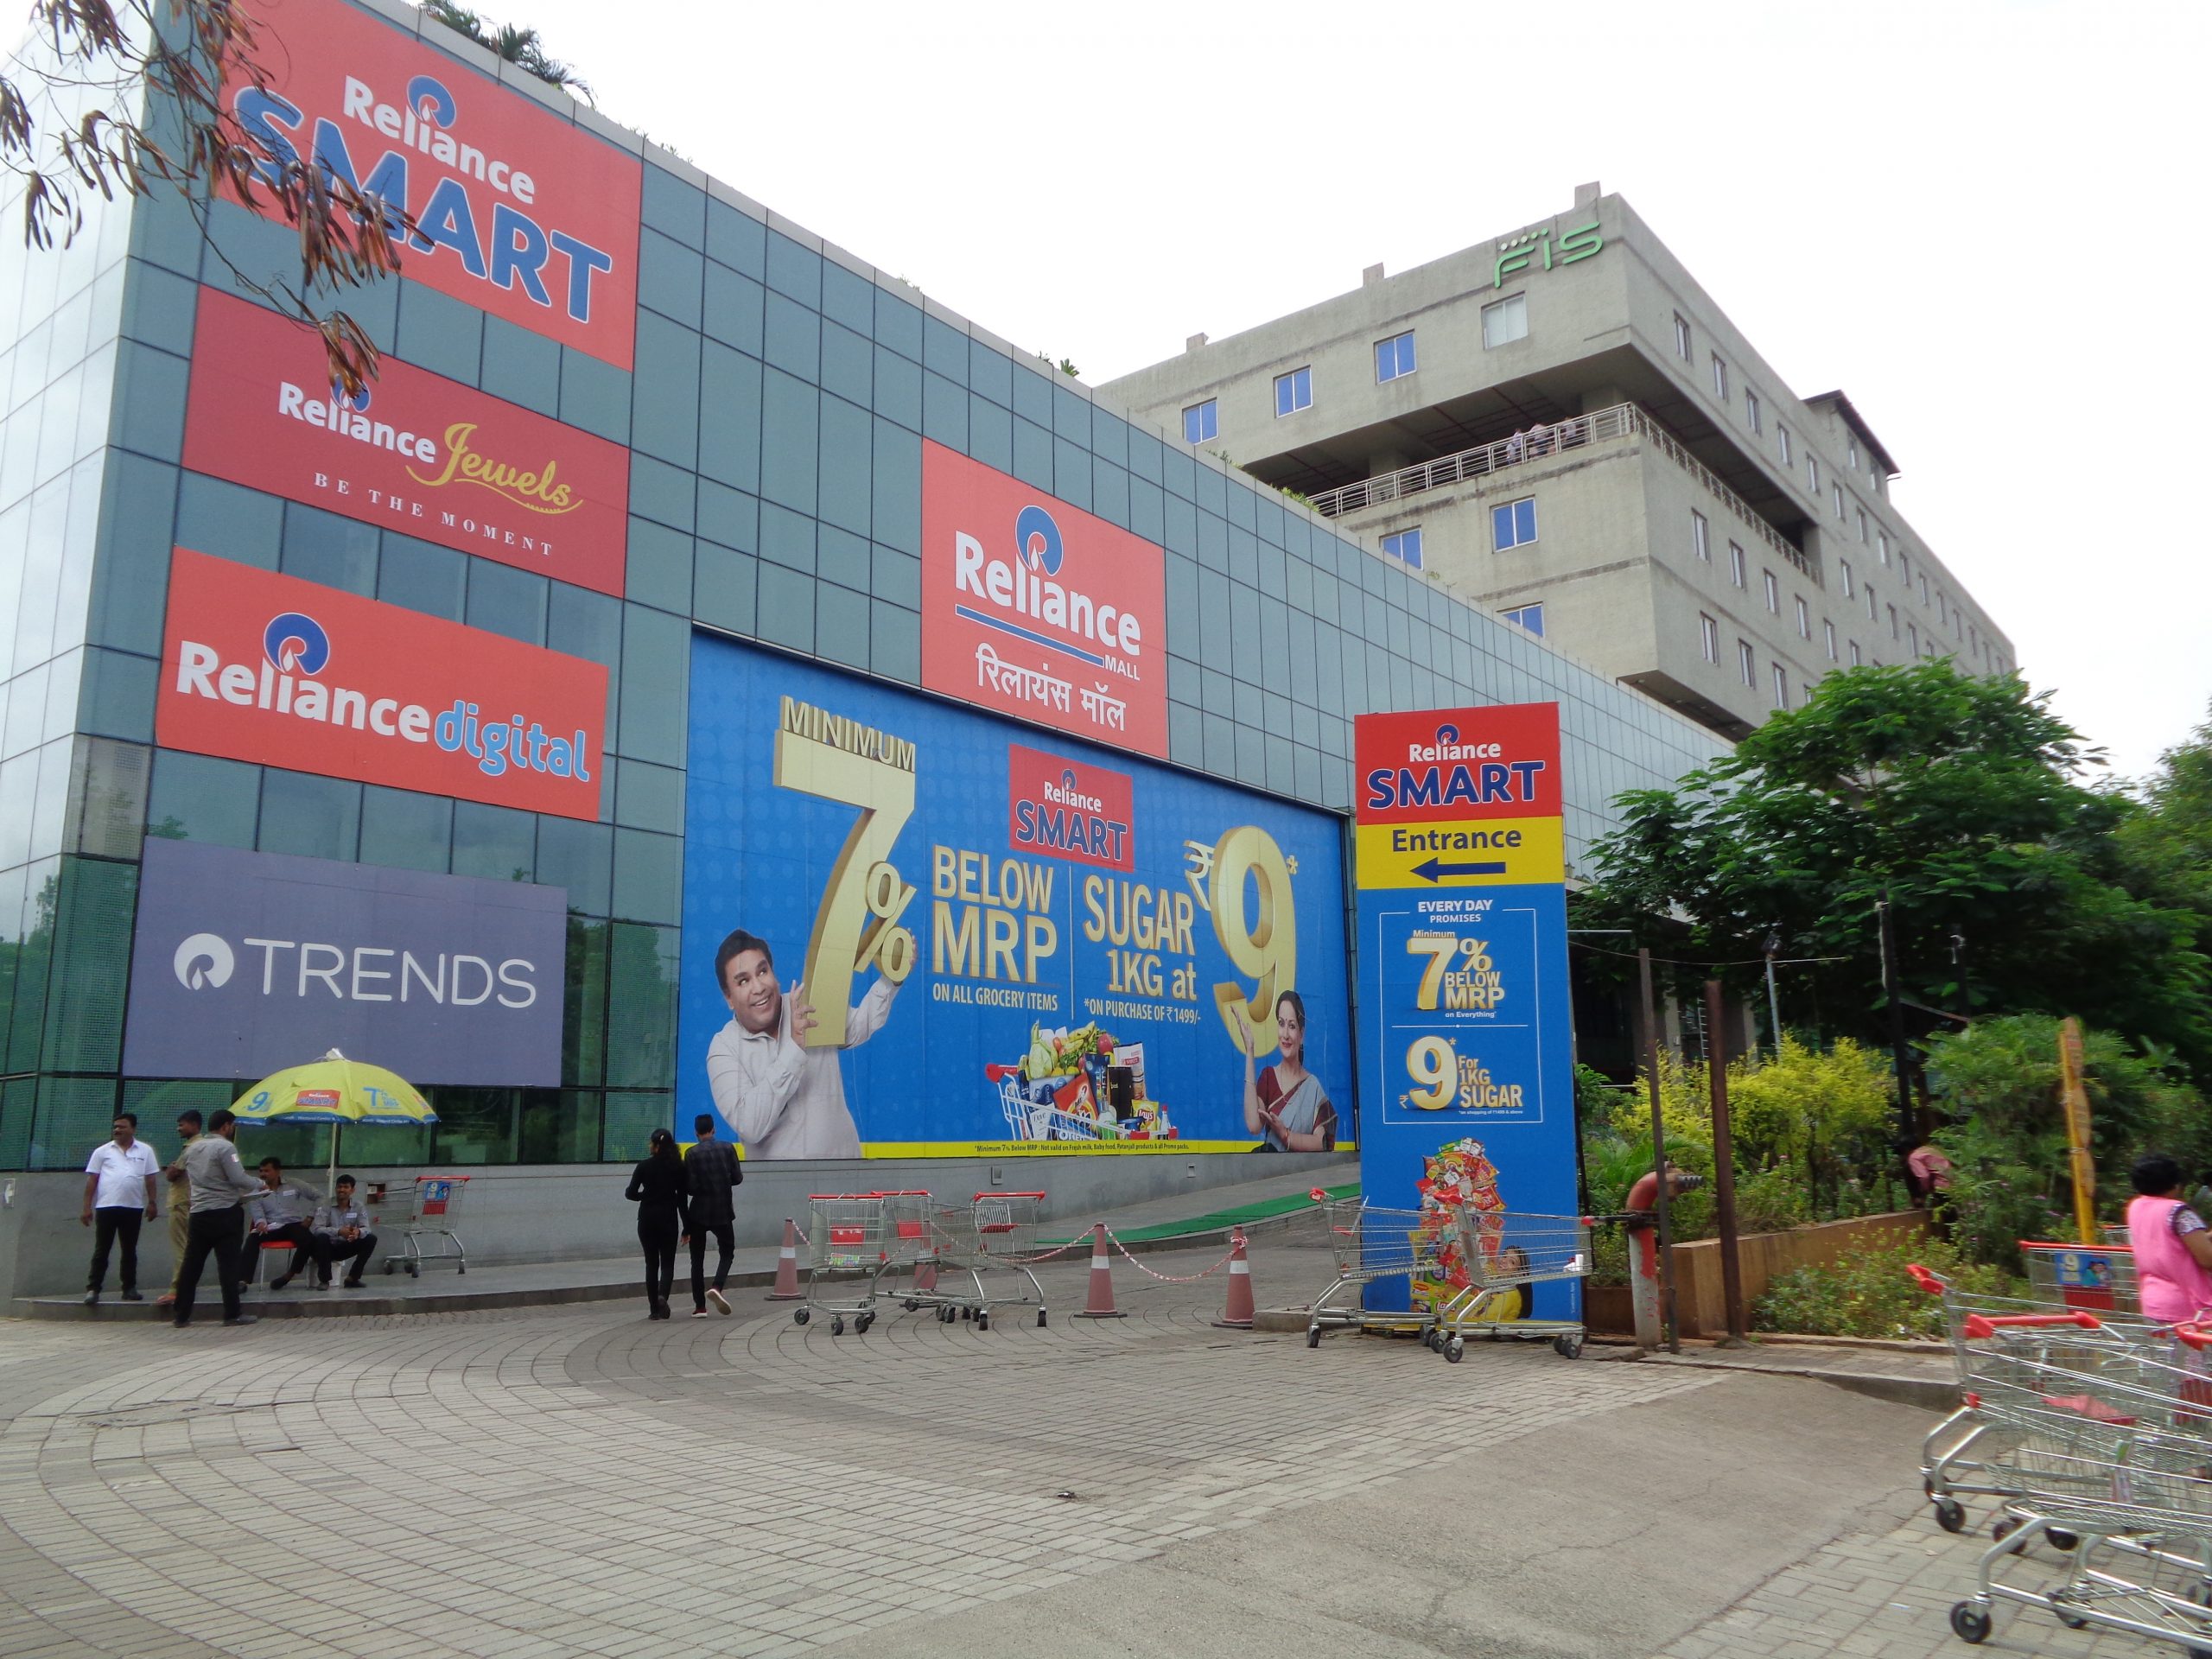 Carlyle might invest up to USD 2 billion in Reliance Retail